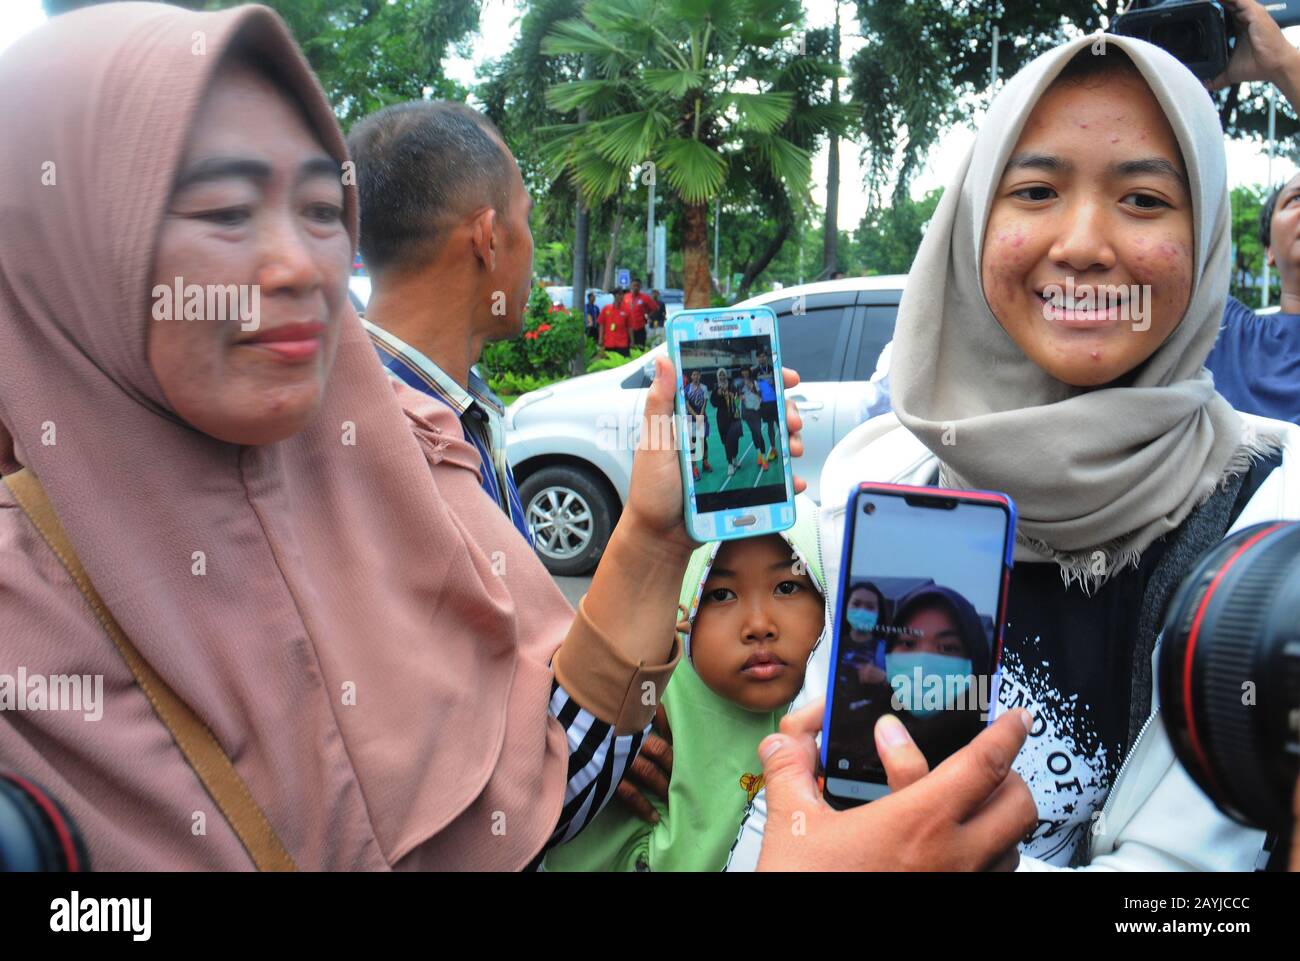 Jakarta, Indonesia. 15th Feb, 2020. Family shows photos of Indonesian citizens who have been observed in Natuna to be picked up and returned with their families at Halim Perdanakusuma Airport in Jakarta, Indonesia. About 250 Indonesian citizens were released after two quarantine period week at Natuna. The disease caused by a novel coronavirus (SARS-CoV-2) has been officially named COVID-19 by the World Health Organization (WHO). The outbreak, which originated in the city of Wuhan in China, has so far killed at least 1,526 people with more than 67,000 infected worldwide, mostly in China. (Cr Stock Photo